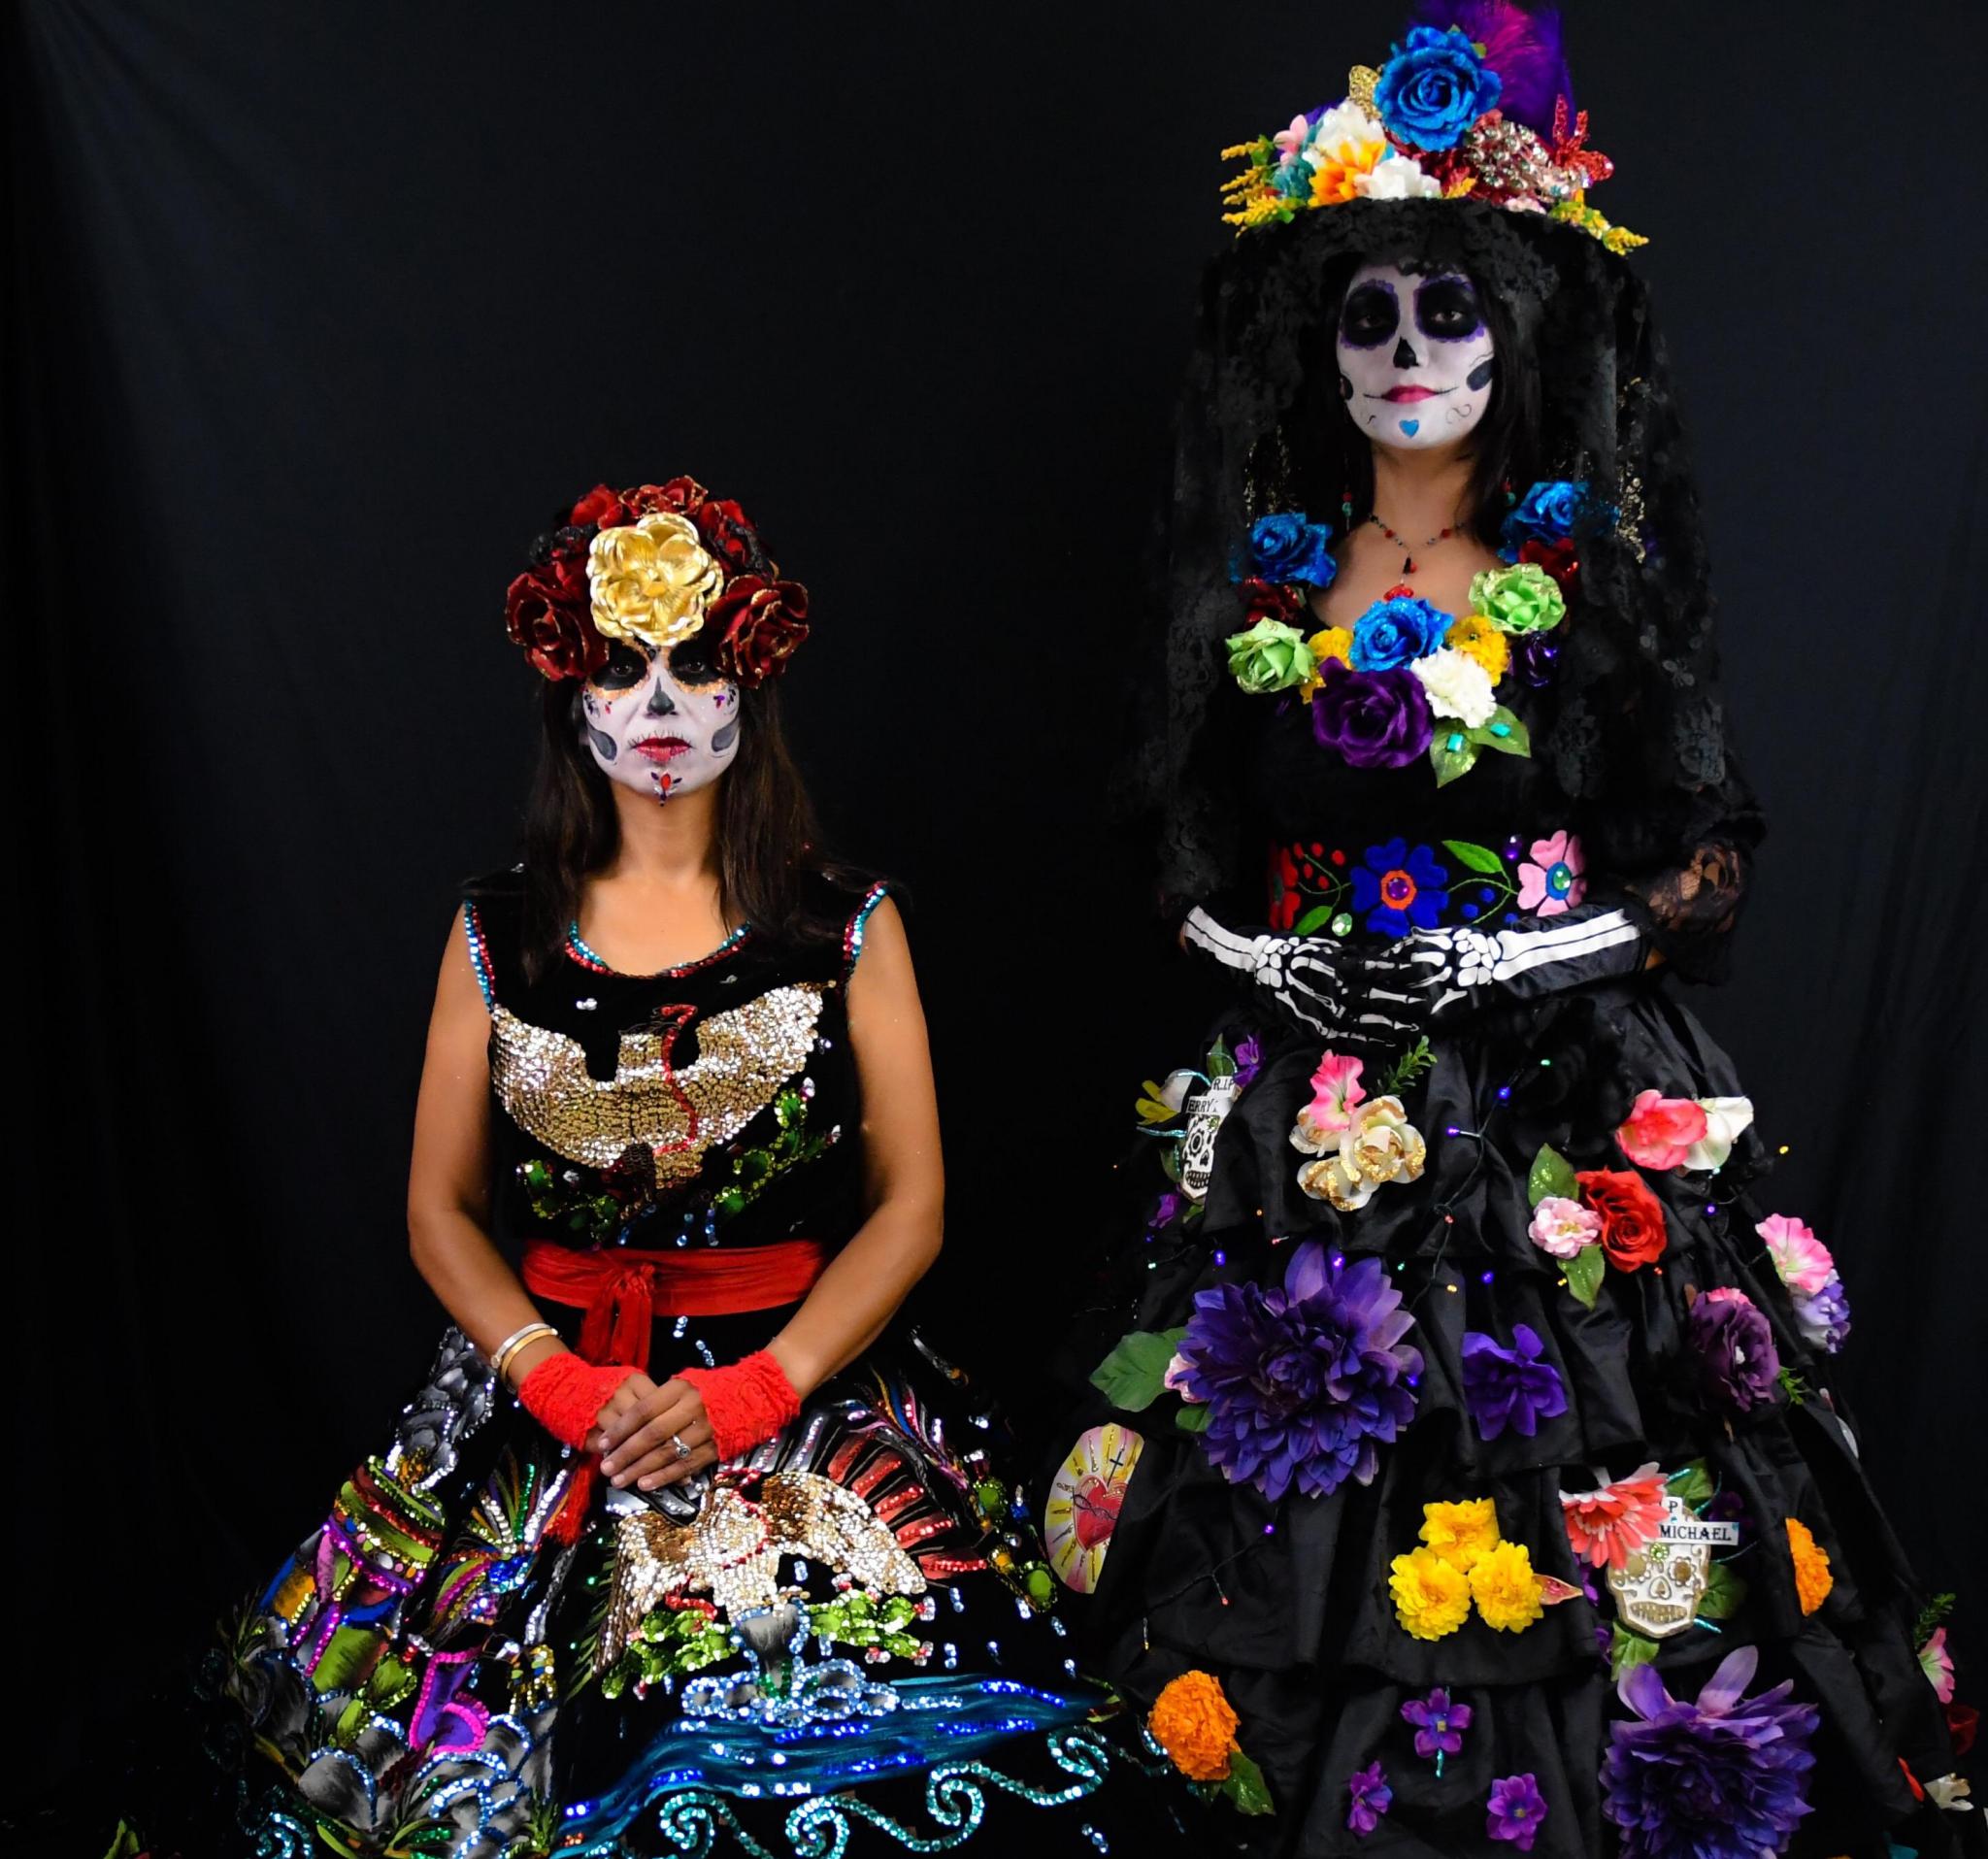 Chicas Calaveras honor loved ones through vibrant costumes